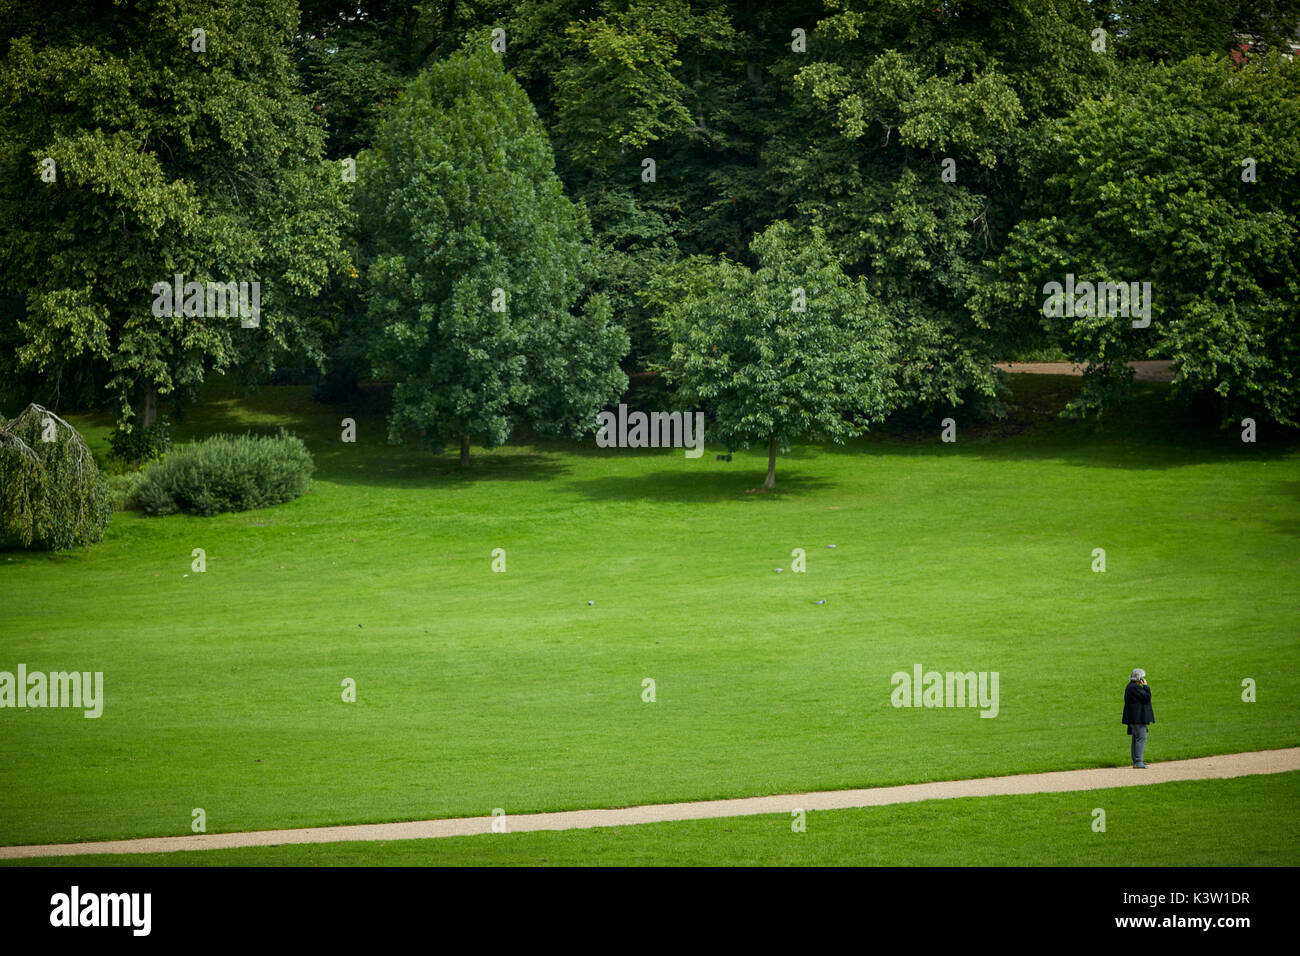 Trees and lawns, in public green space Avenham and Miller Parks in  Preston lancashire, Stock Photo